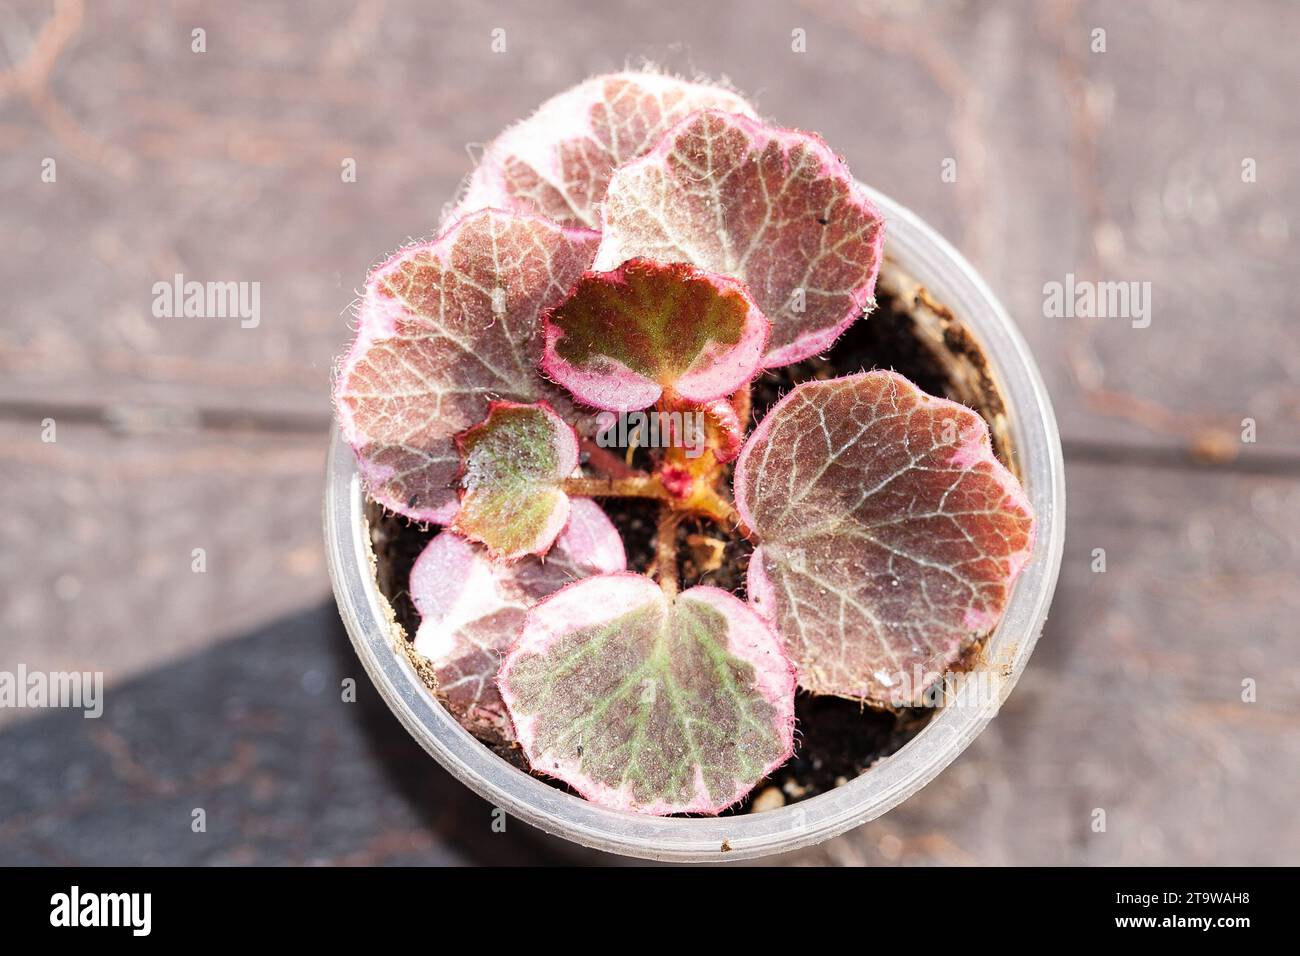 Saxifraga stolonifera tricolor, strawberry Geranium variegated House plant collection Stock Photo